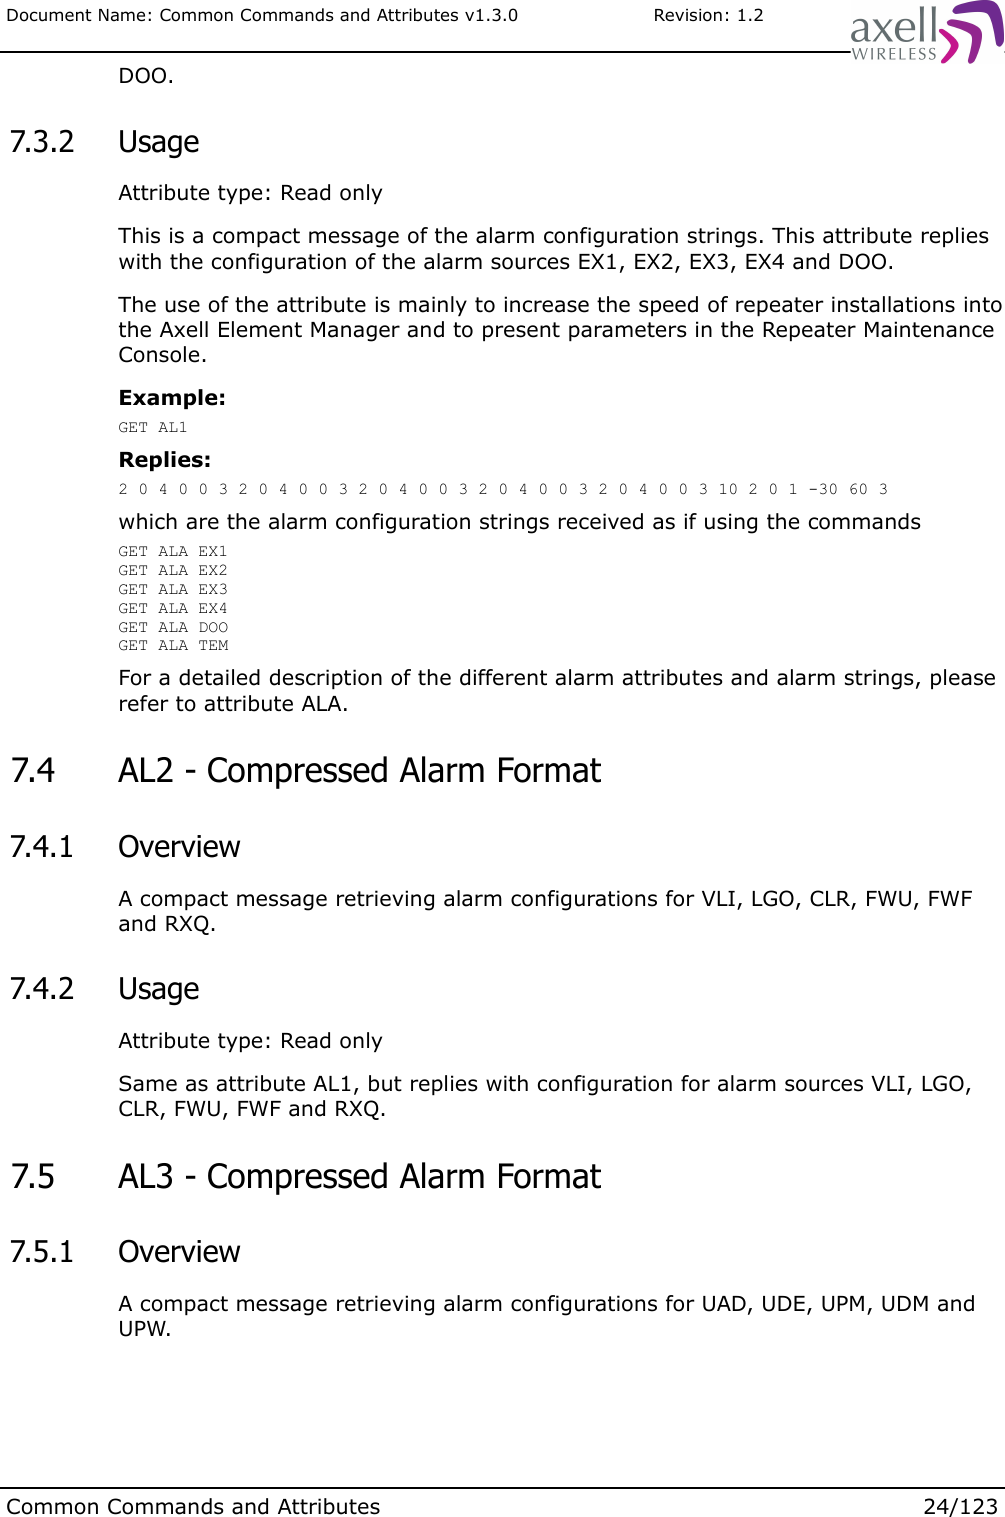 Document Name: Common Commands and Attributes v1.3.0                       Revision: 1.2DOO. 7.3.2  UsageAttribute type: Read onlyThis is a compact message of the alarm configuration strings. This attribute replies with the configuration of the alarm sources EX1, EX2, EX3, EX4 and DOO.The use of the attribute is mainly to increase the speed of repeater installations into the Axell Element Manager and to present parameters in the Repeater Maintenance Console.Example:GET AL1Replies:2 0 4 0 0 3 2 0 4 0 0 3 2 0 4 0 0 3 2 0 4 0 0 3 2 0 4 0 0 3 10 2 0 1 -30 60 3which are the alarm configuration strings received as if using the commandsGET ALA EX1GET ALA EX2GET ALA EX3GET ALA EX4GET ALA DOOGET ALA TEMFor a detailed description of the different alarm attributes and alarm strings, please refer to attribute ALA. 7.4  AL2 - Compressed Alarm Format  7.4.1  OverviewA compact message retrieving alarm configurations for VLI, LGO, CLR, FWU, FWF and RXQ. 7.4.2  UsageAttribute type: Read onlySame as attribute AL1, but replies with configuration for alarm sources VLI, LGO, CLR, FWU, FWF and RXQ. 7.5  AL3 - Compressed Alarm Format  7.5.1  OverviewA compact message retrieving alarm configurations for UAD, UDE, UPM, UDM and UPW.Common Commands and Attributes 24/123